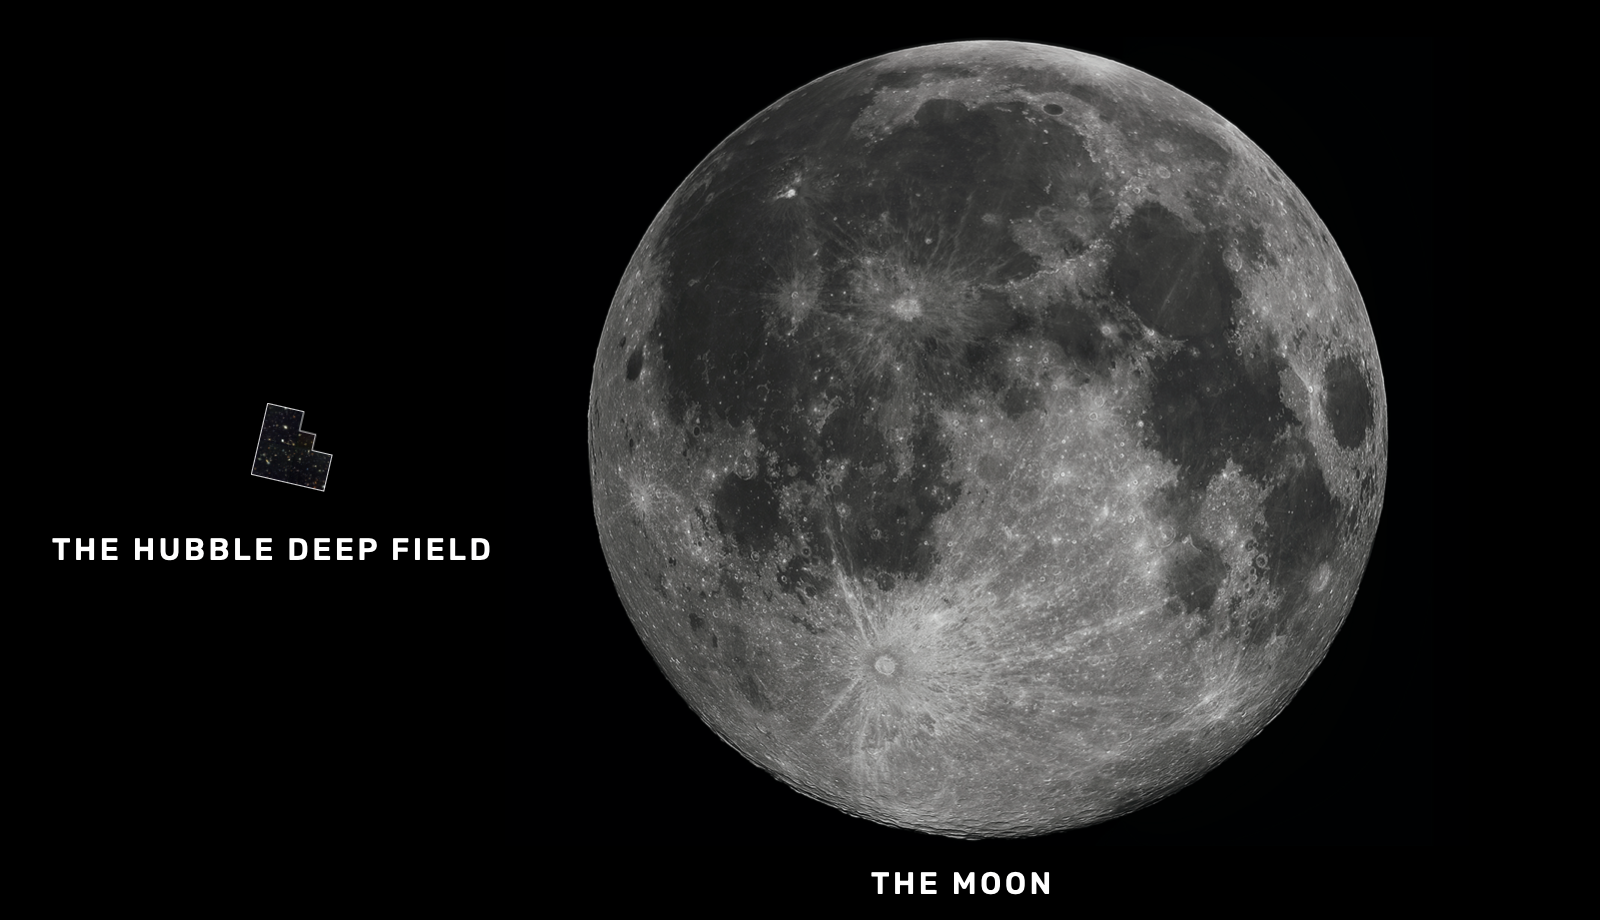 Size comparison between the Moon and Hubble Deep Field.